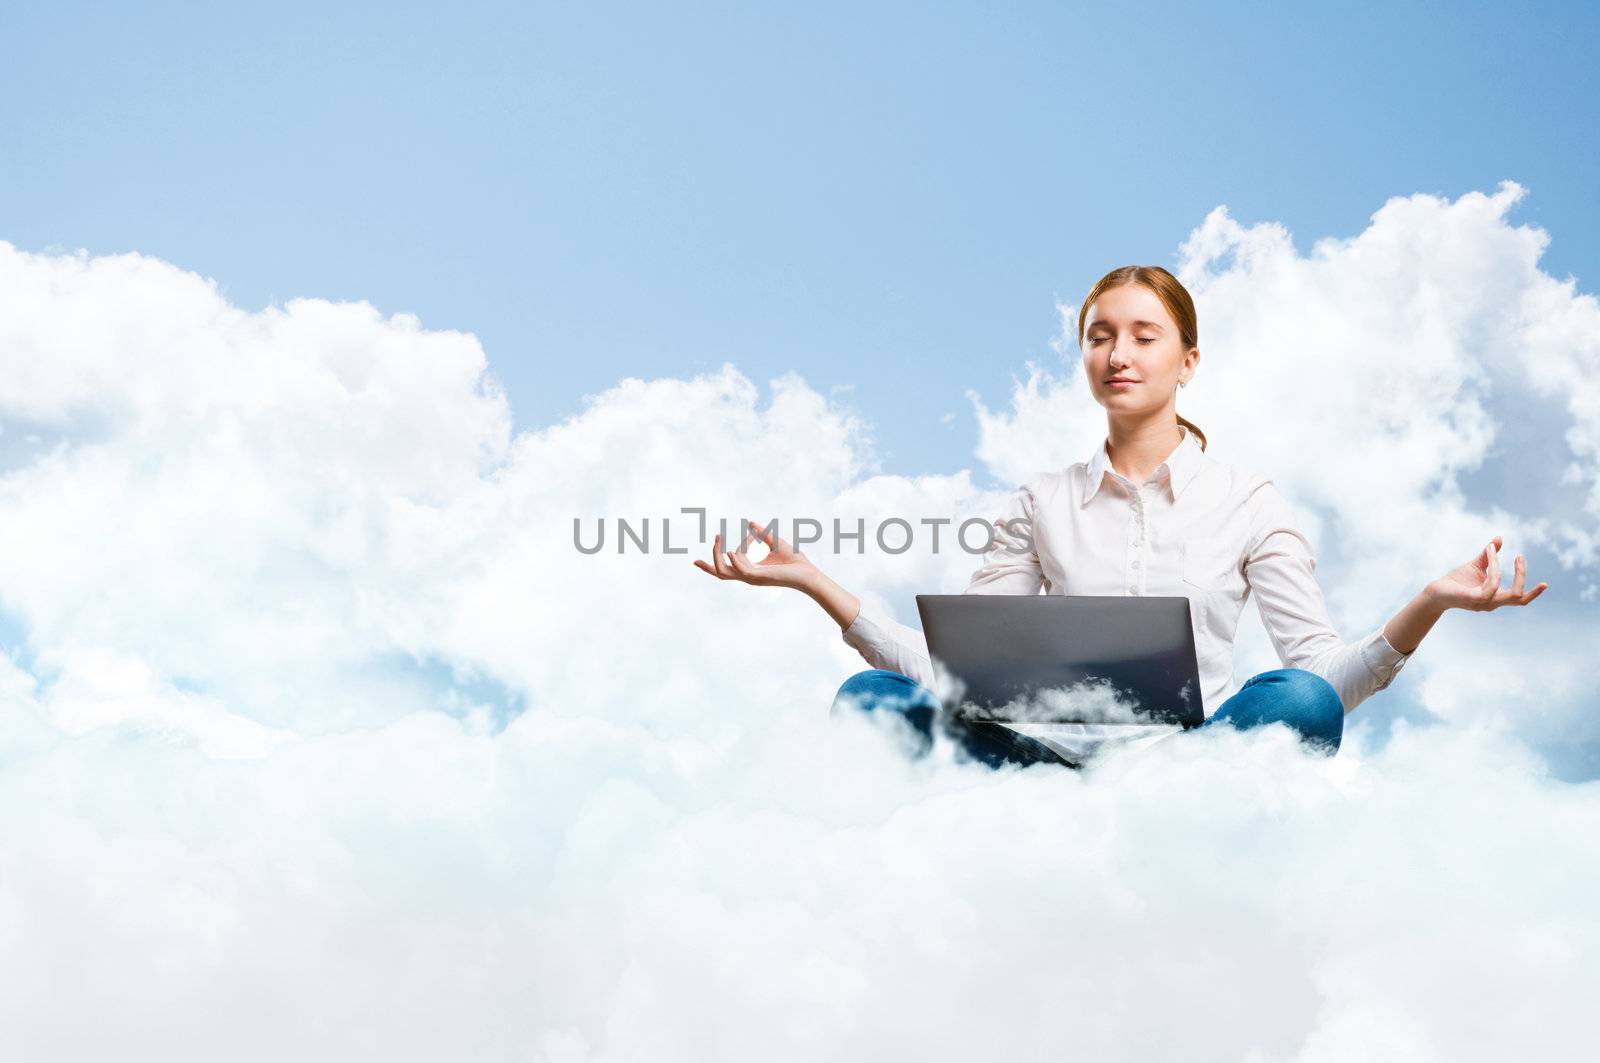 young girl meditating on the clouds with a laptop, dreaming at work